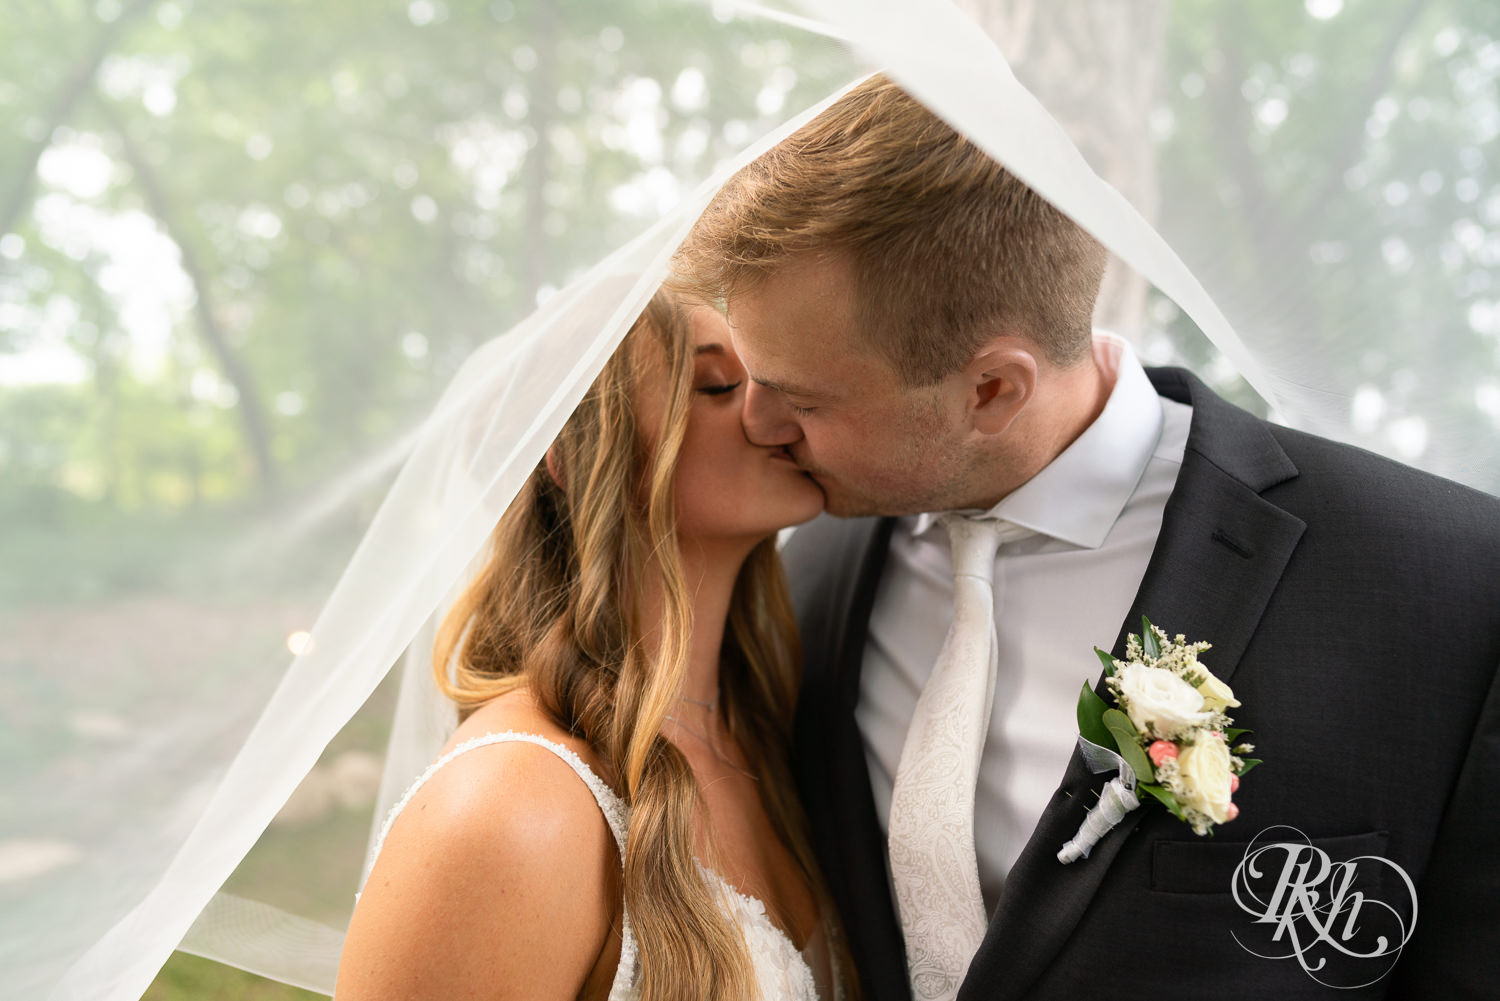 Bride and groom kiss under veil on wedding day at Ahavah Cottage in Elysian, Minnesota.